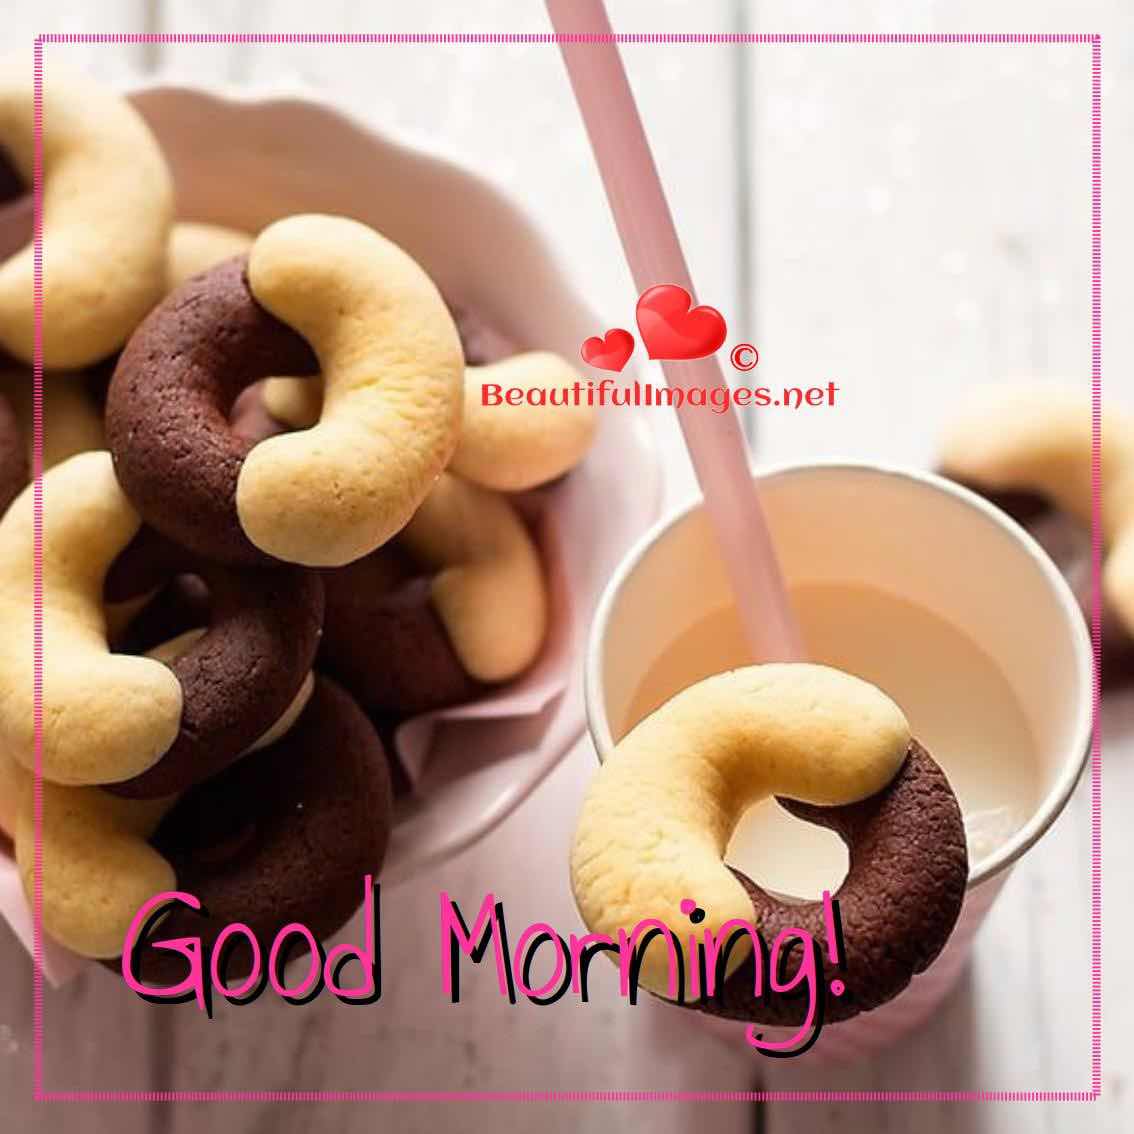 Good-Morning-Cookies-Nice-Images-Pictures-Facebook-Whatsapp